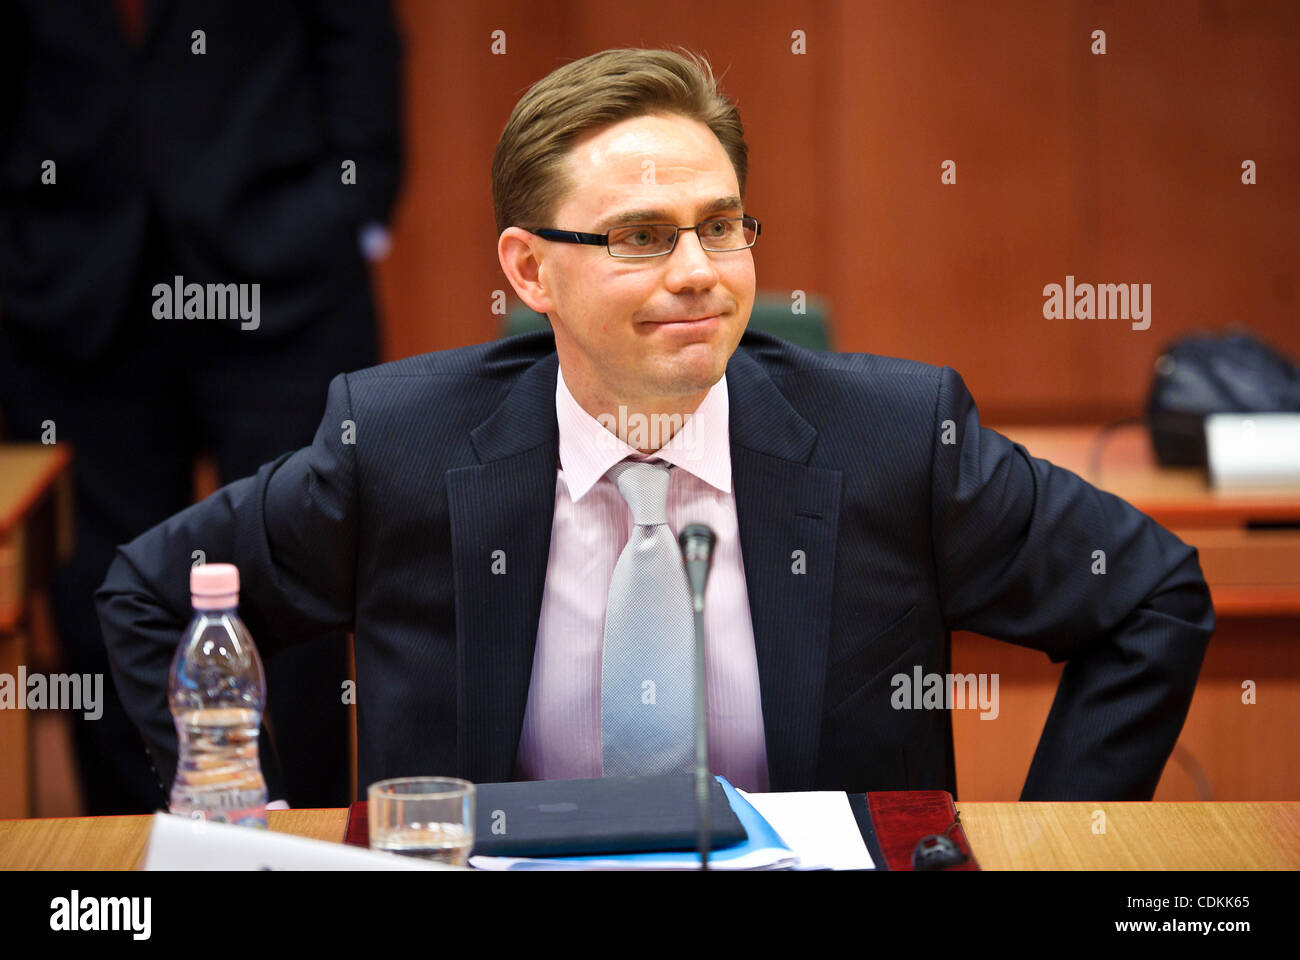 Mar. 21, 2011 - Brussels, BXL, Belgium - Finnish Finance Minister Jyrki Katainen  before a ministerial meeting on European Stability Mecanism at EU headquarters in Brussels  in  Brussels, Belgium on 2011-03-21 The extraordinary meeting of finance ministers of the eurozone will finalize discussions o Stock Photo